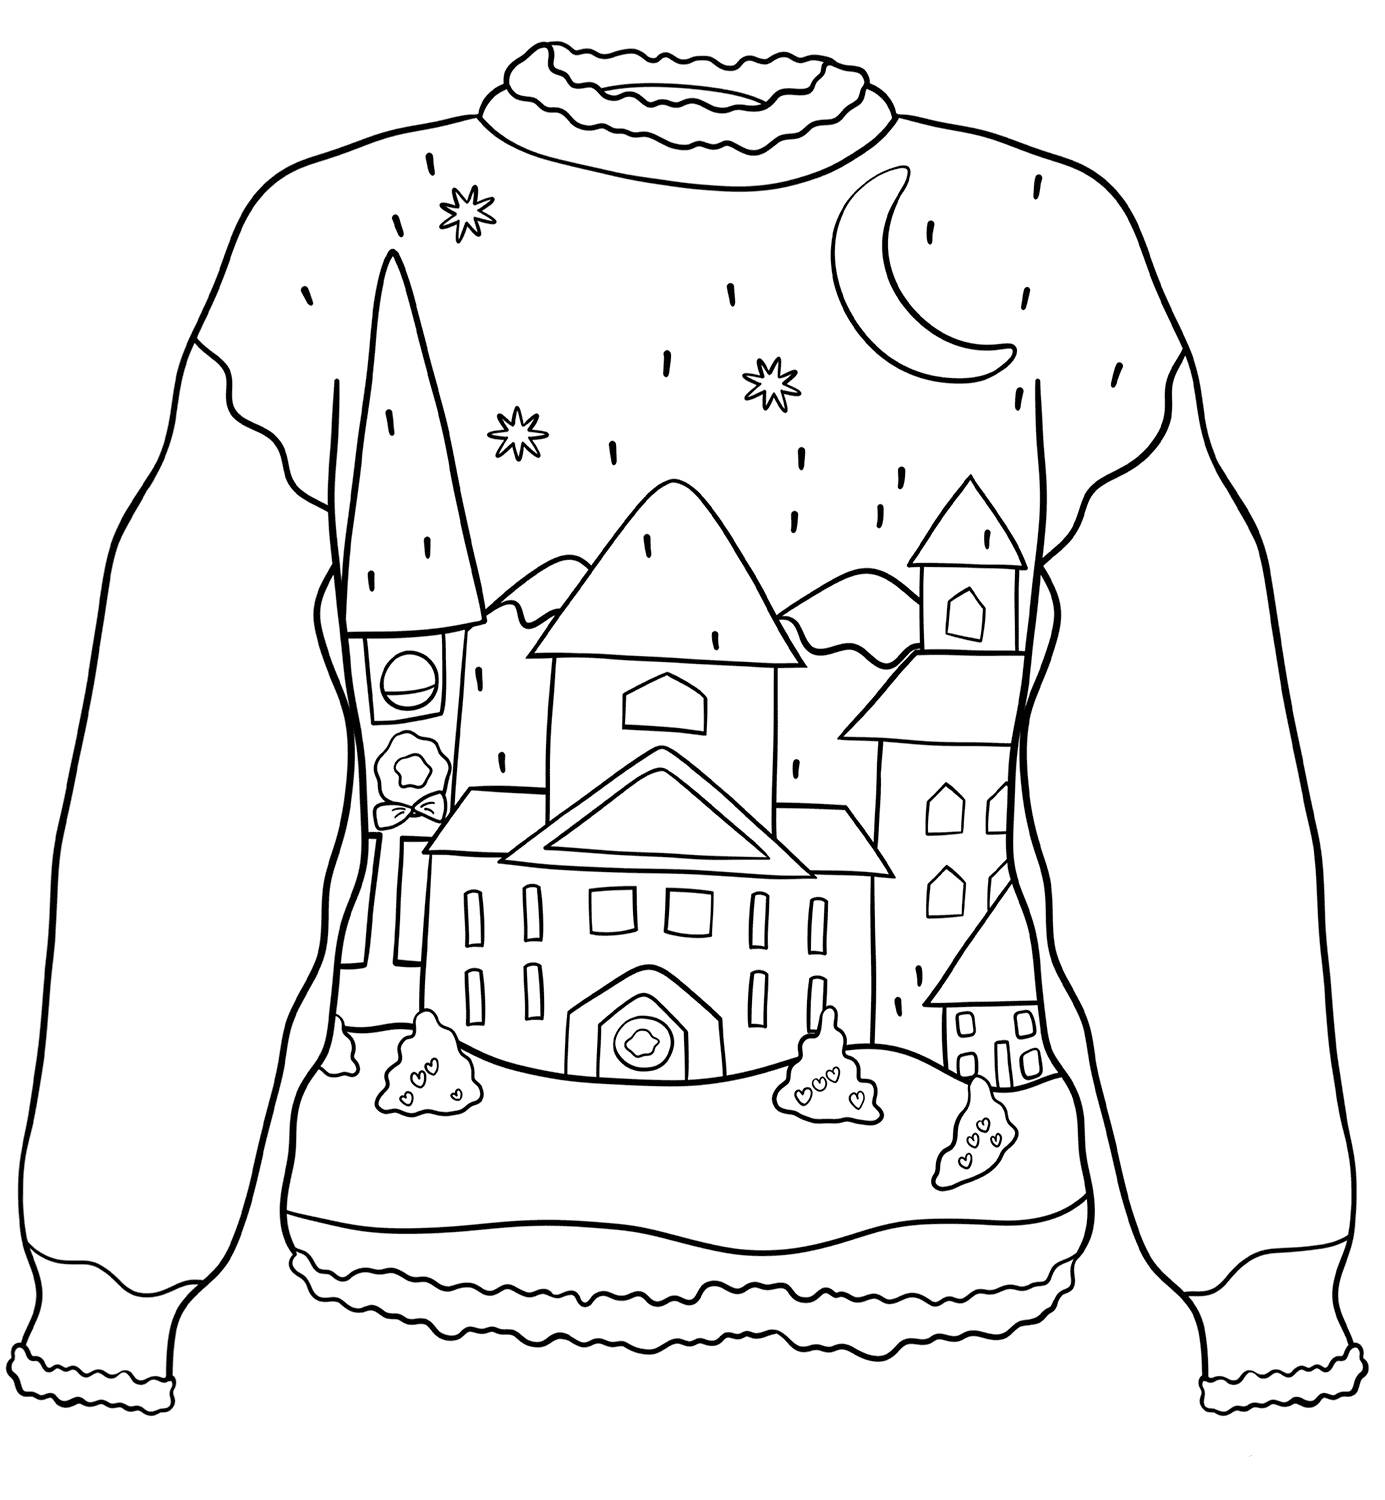 Creative sweater coloring for kids